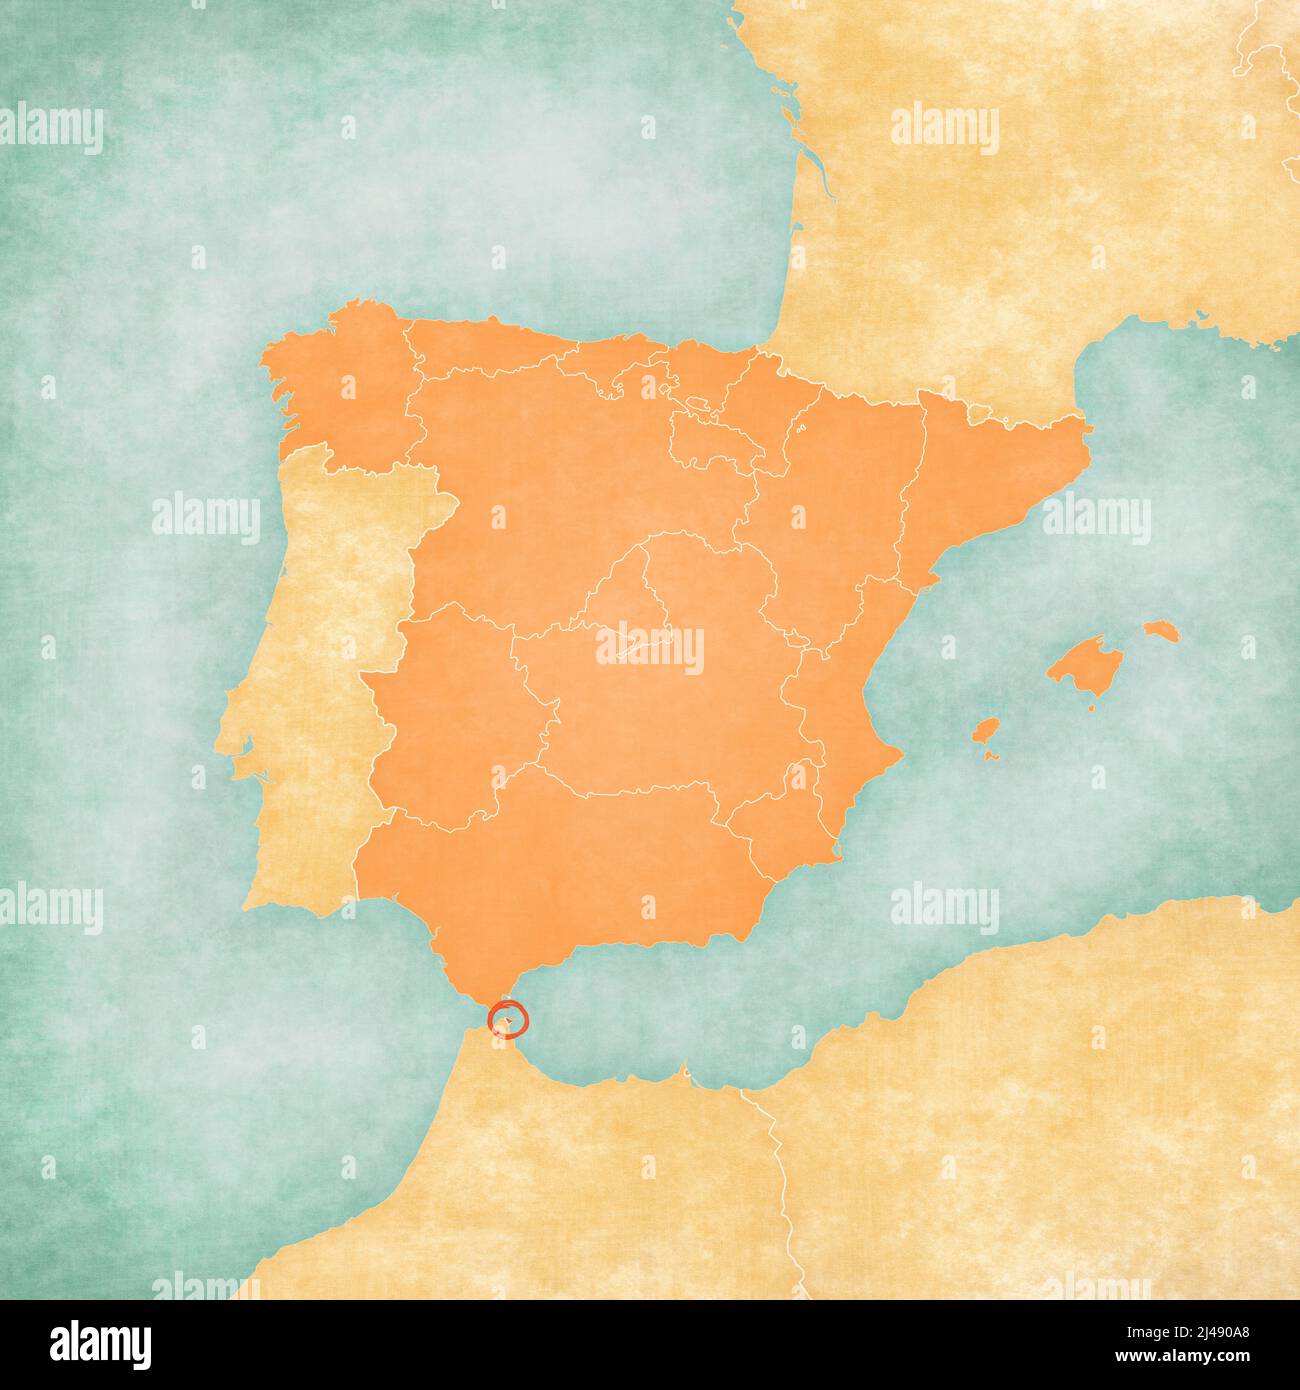 Ceuta (Spain) on the map of Iberian Peninsula in soft grunge and vintage style on old paper. Stock Photo